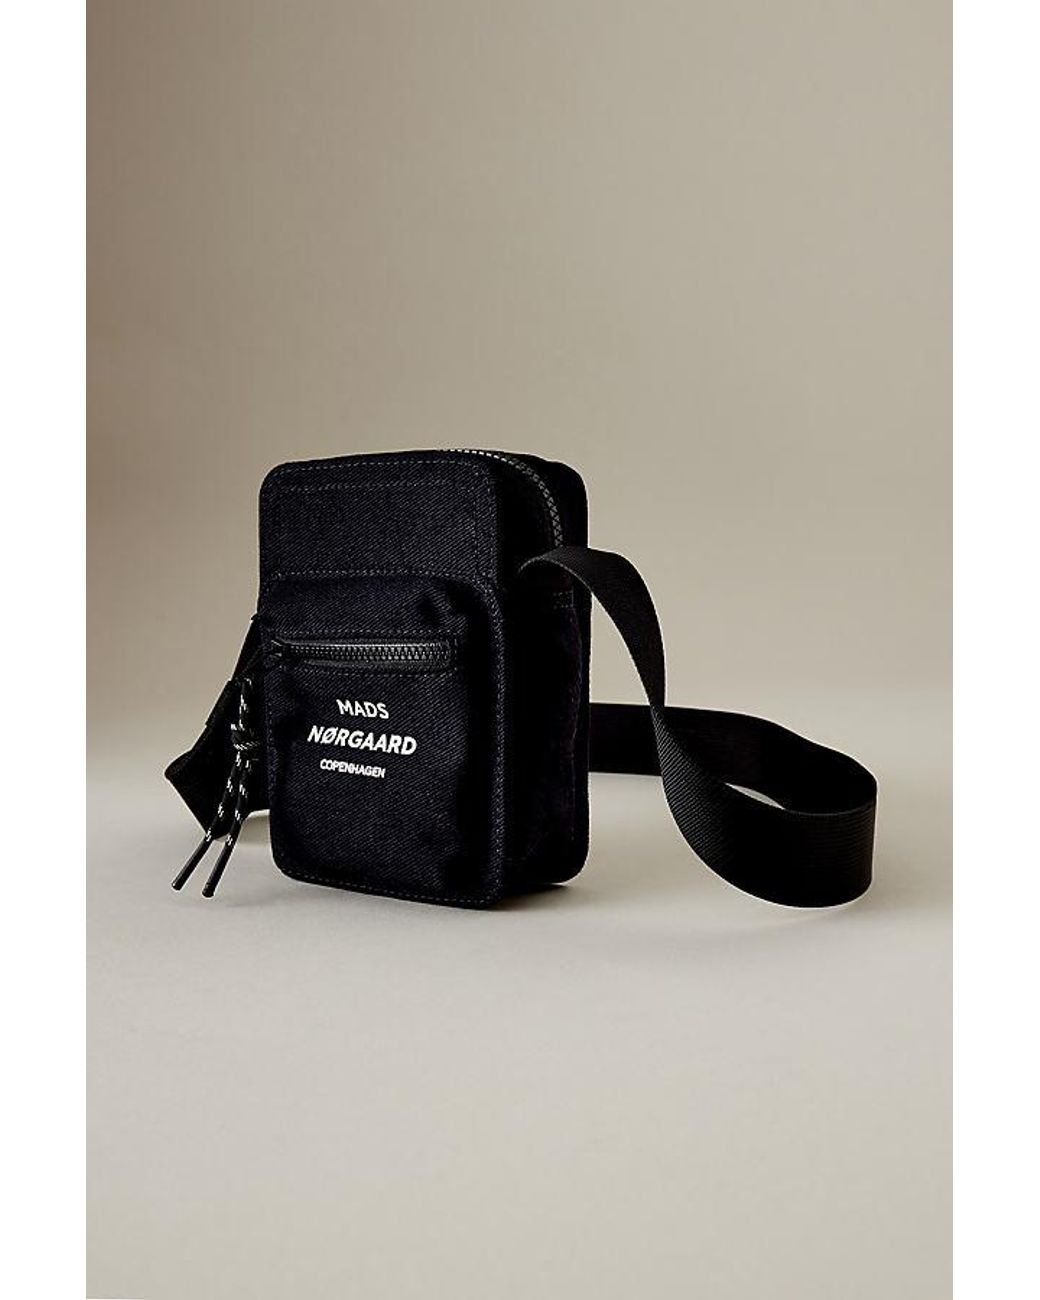 Anthropologie Mads Norgaard Mini Recycled Cotton Crossbody Bag in Black |  Lyst UK